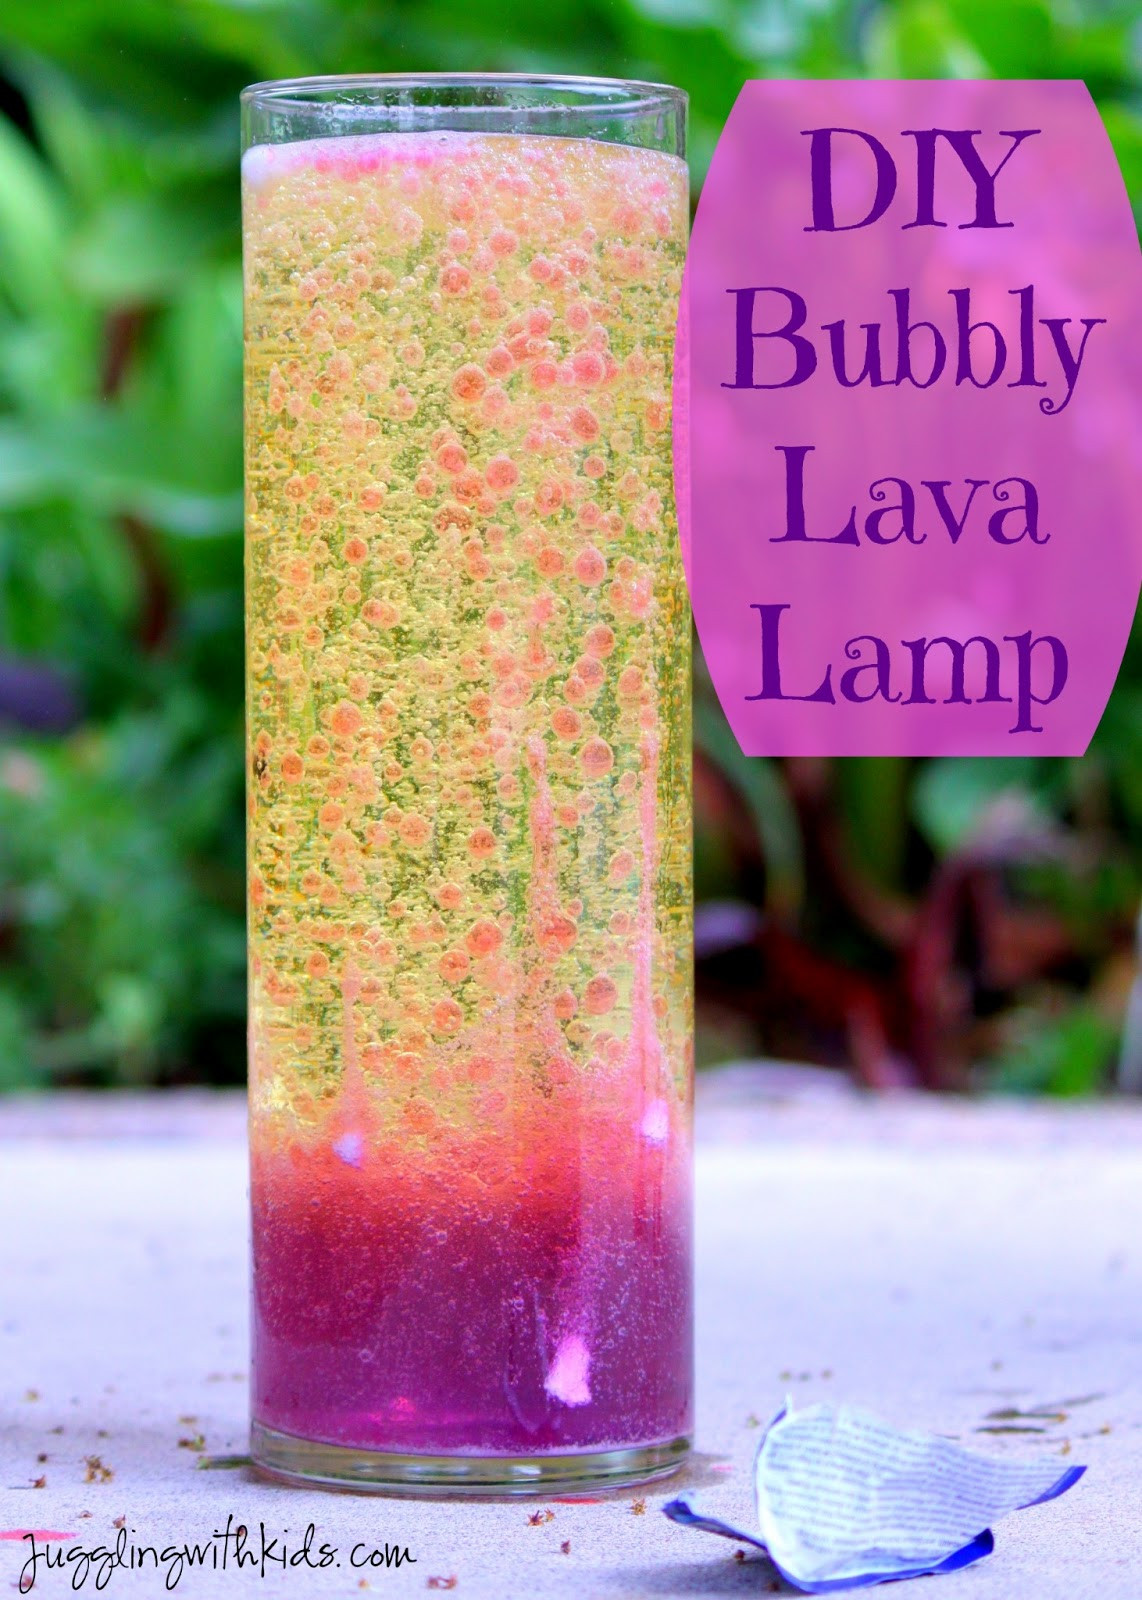 Diy Lava Lamp For Kids
 DIY Bubbly Lava Lamps – Juggling With Kids